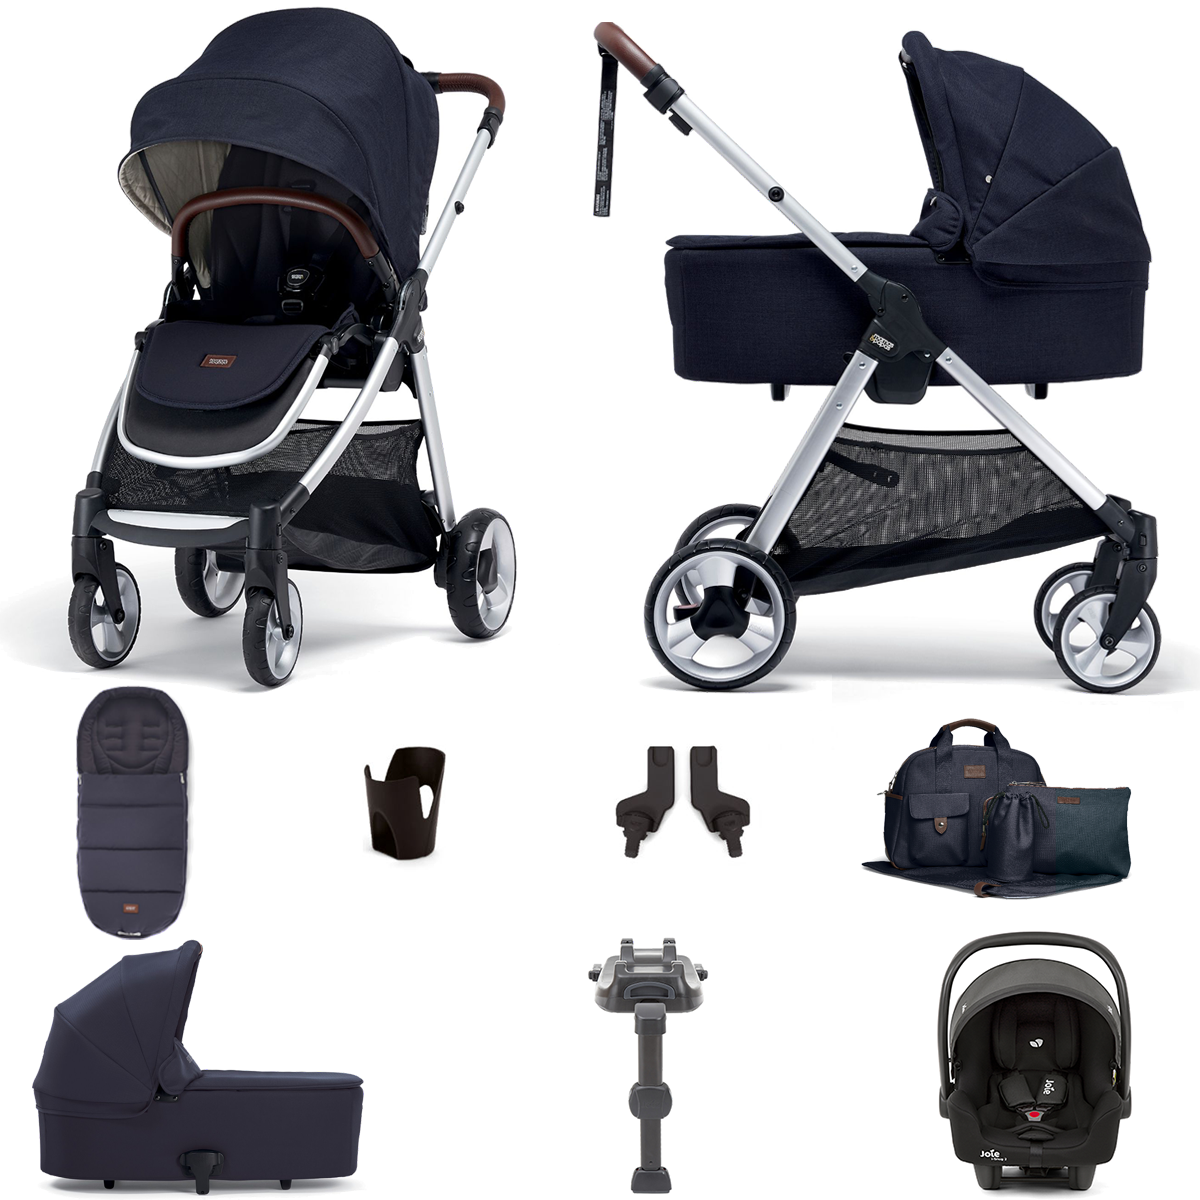 Mamas & Papas Flip XT2 8pc Essentials (i-Size 2 Car Seat) Travel System with Carrycot & ISOFIX Base - Navy